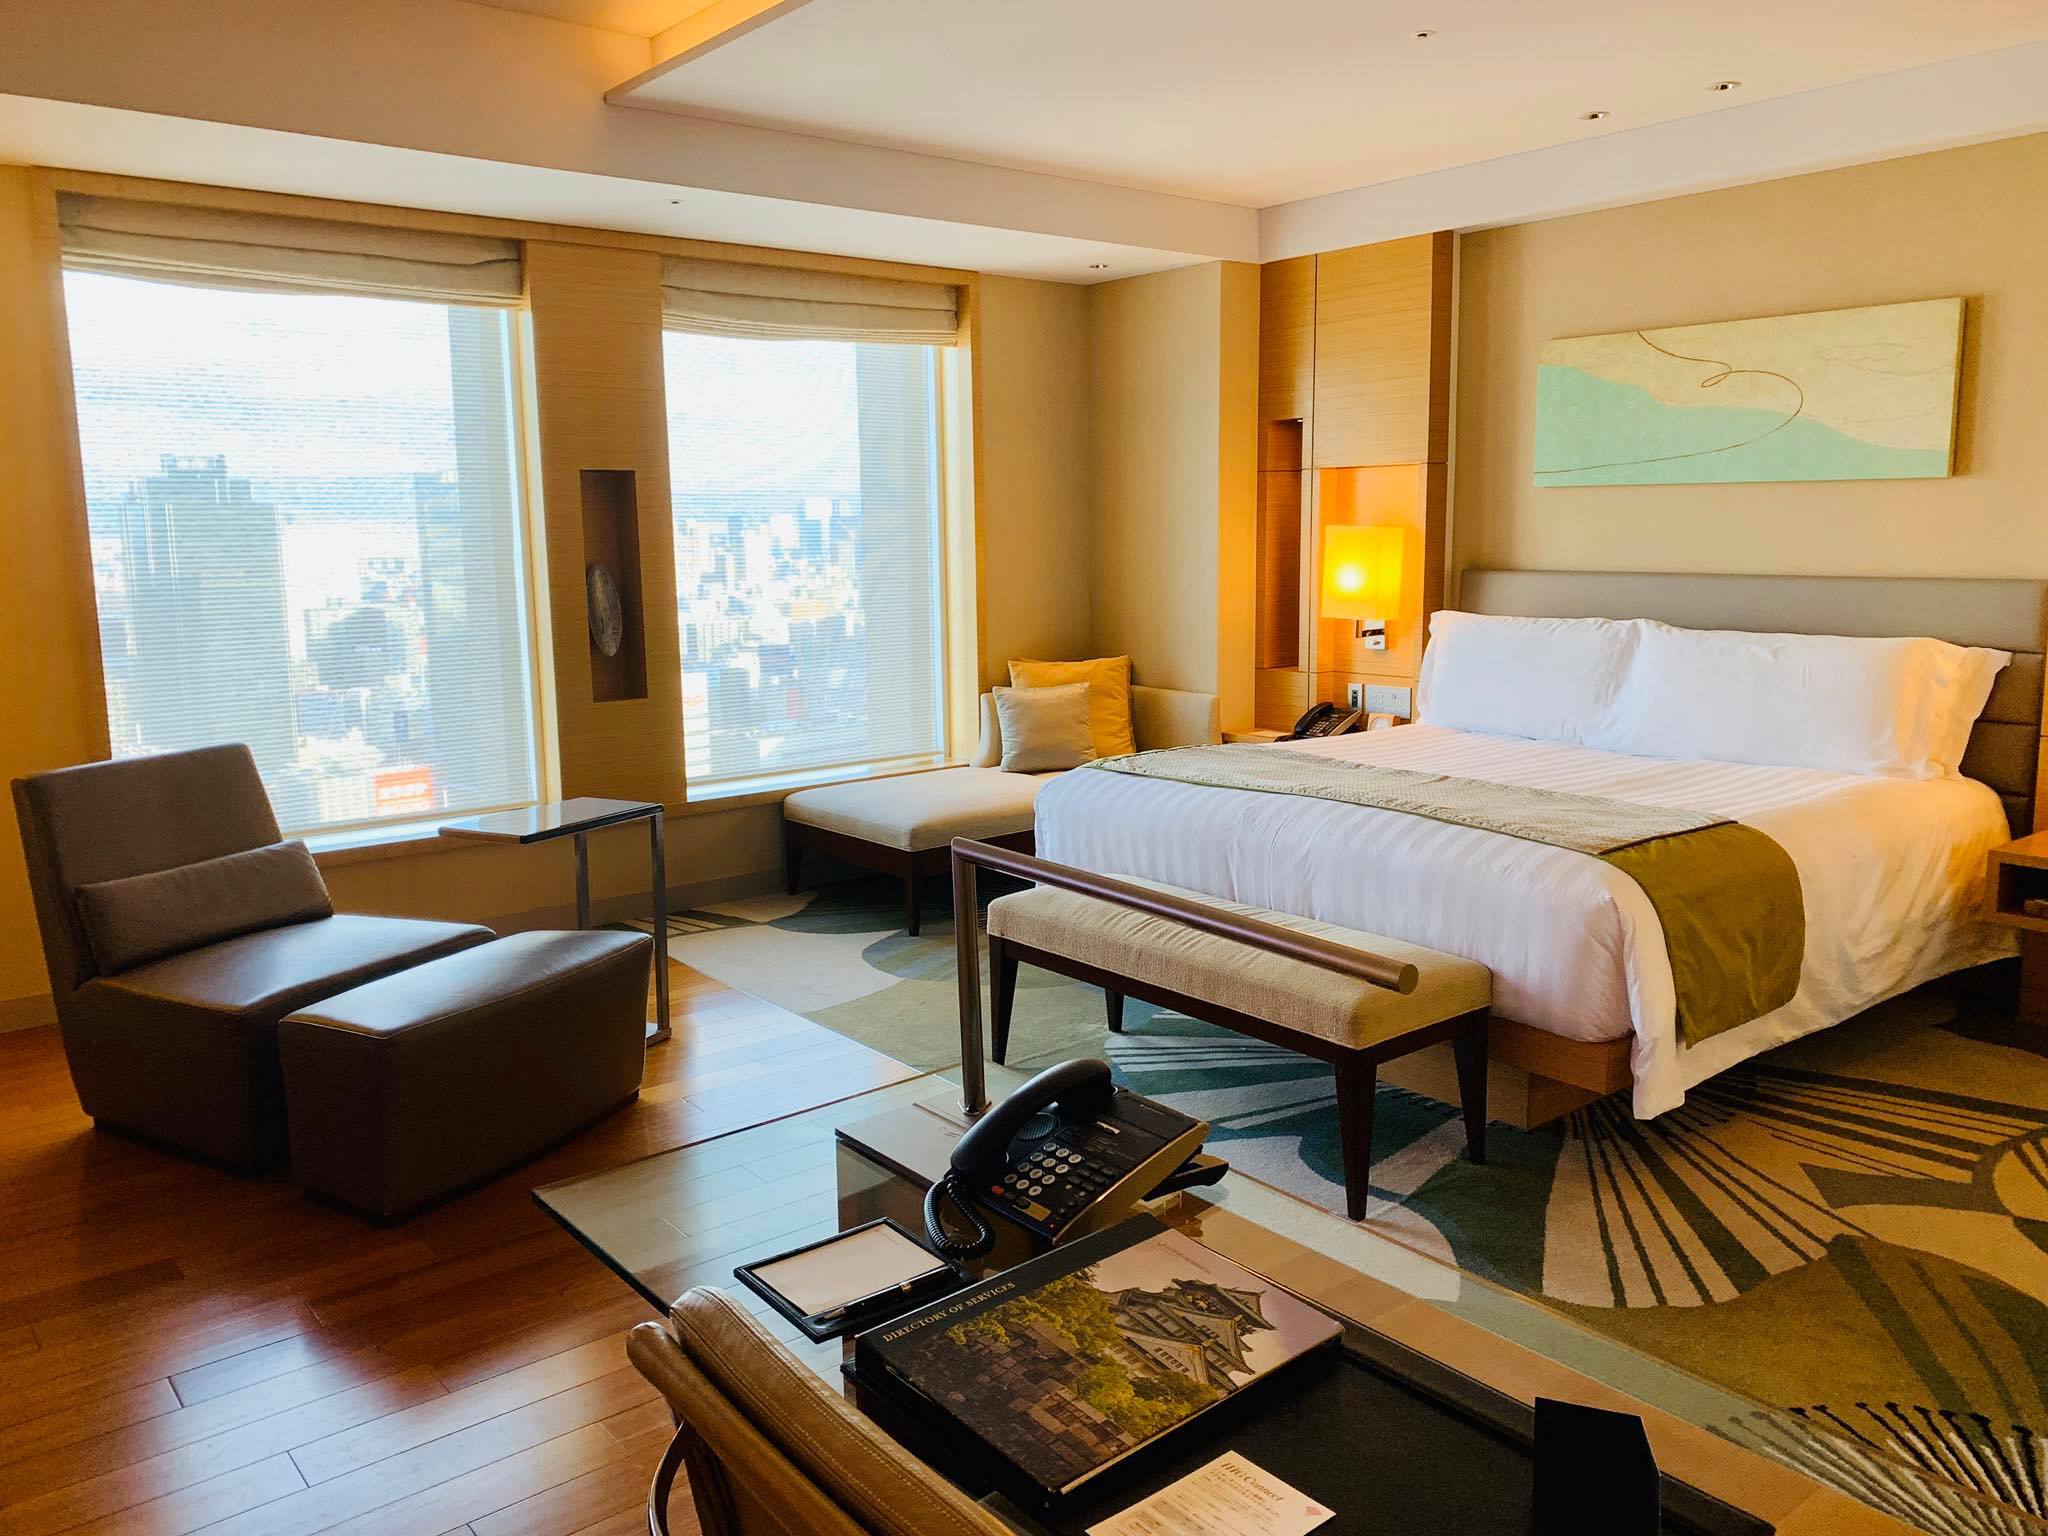 My Luxury Hotel Experience with InterContinental Osakaerience with InterContinental Osaka